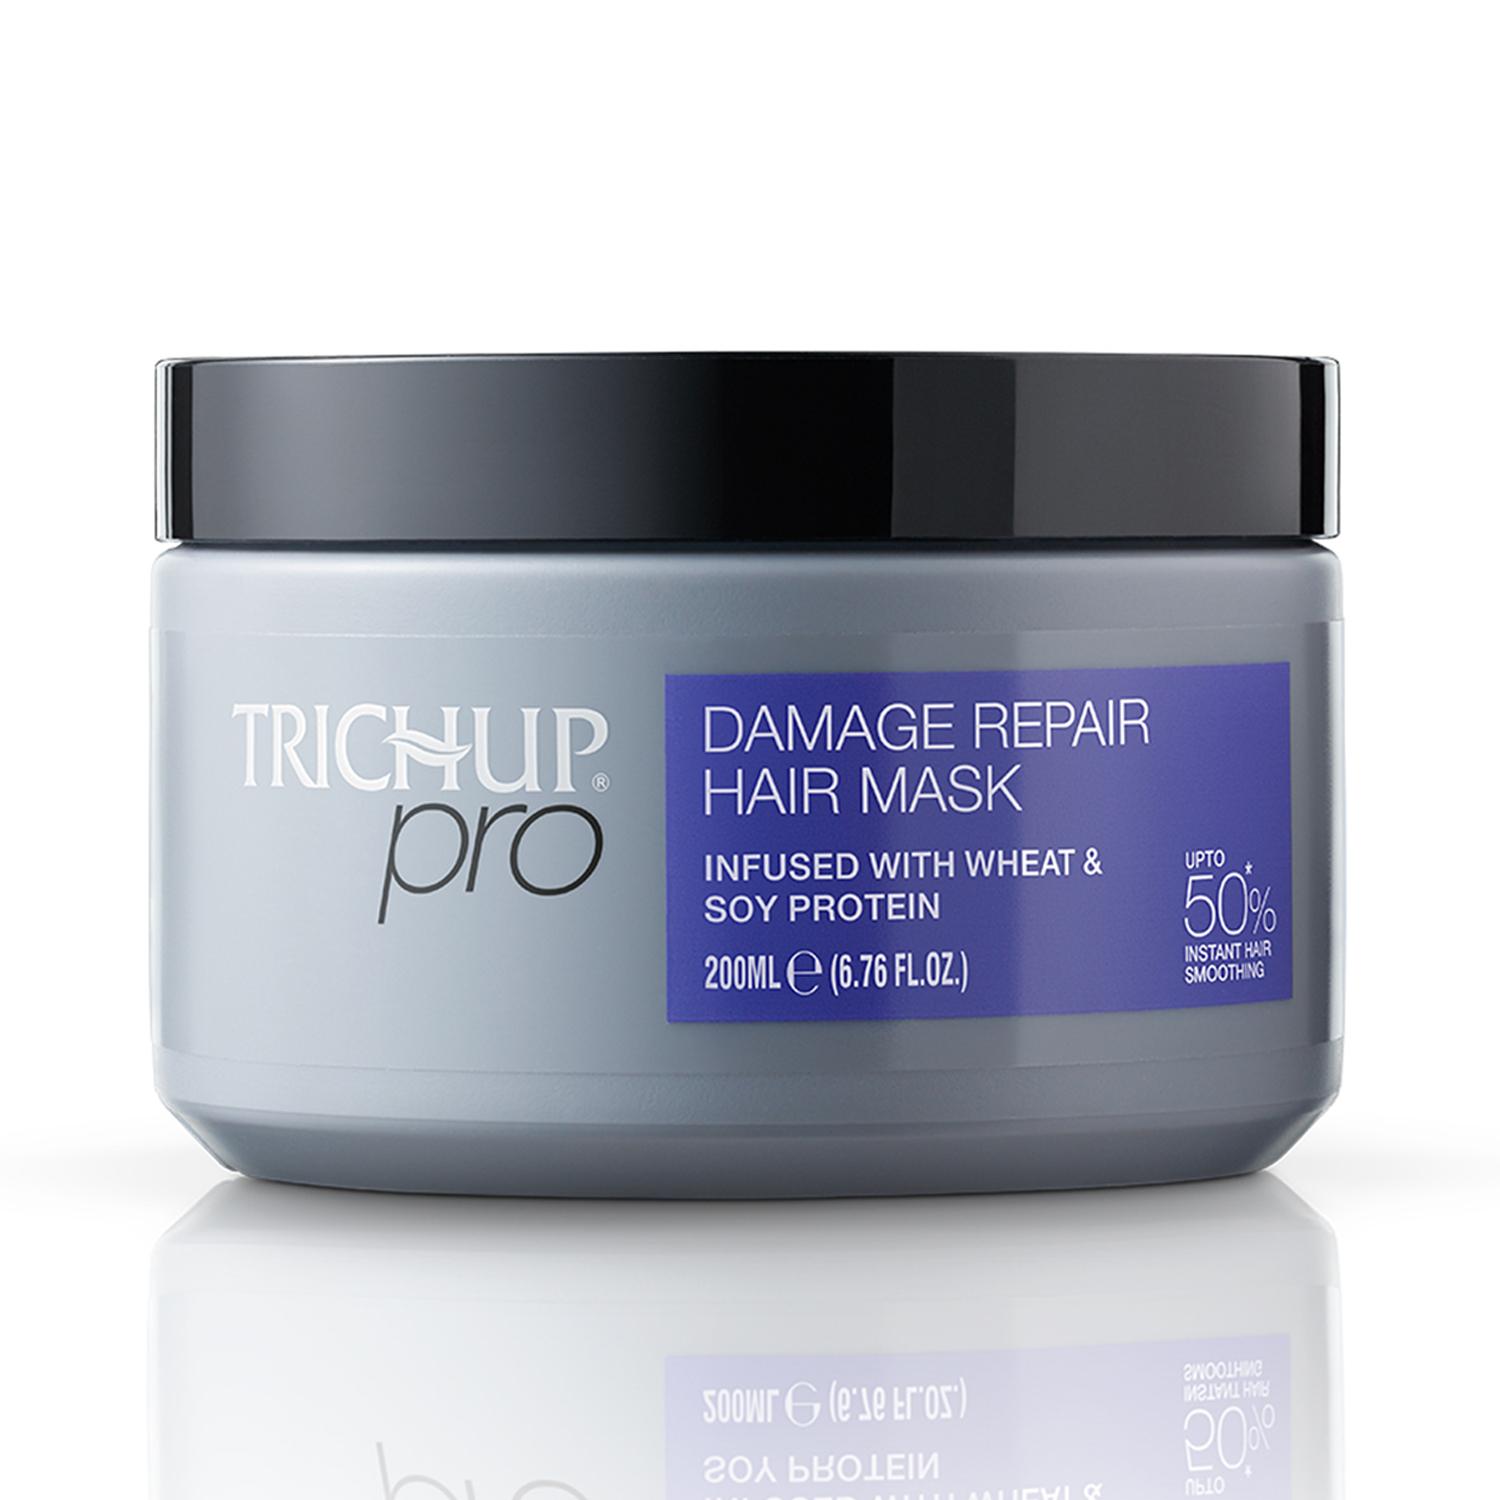 Trichup | Trichup Pro Damage Repair Hair Mask for Dry Frizzy Hair, Improves Strength and Manageability (200 ml)